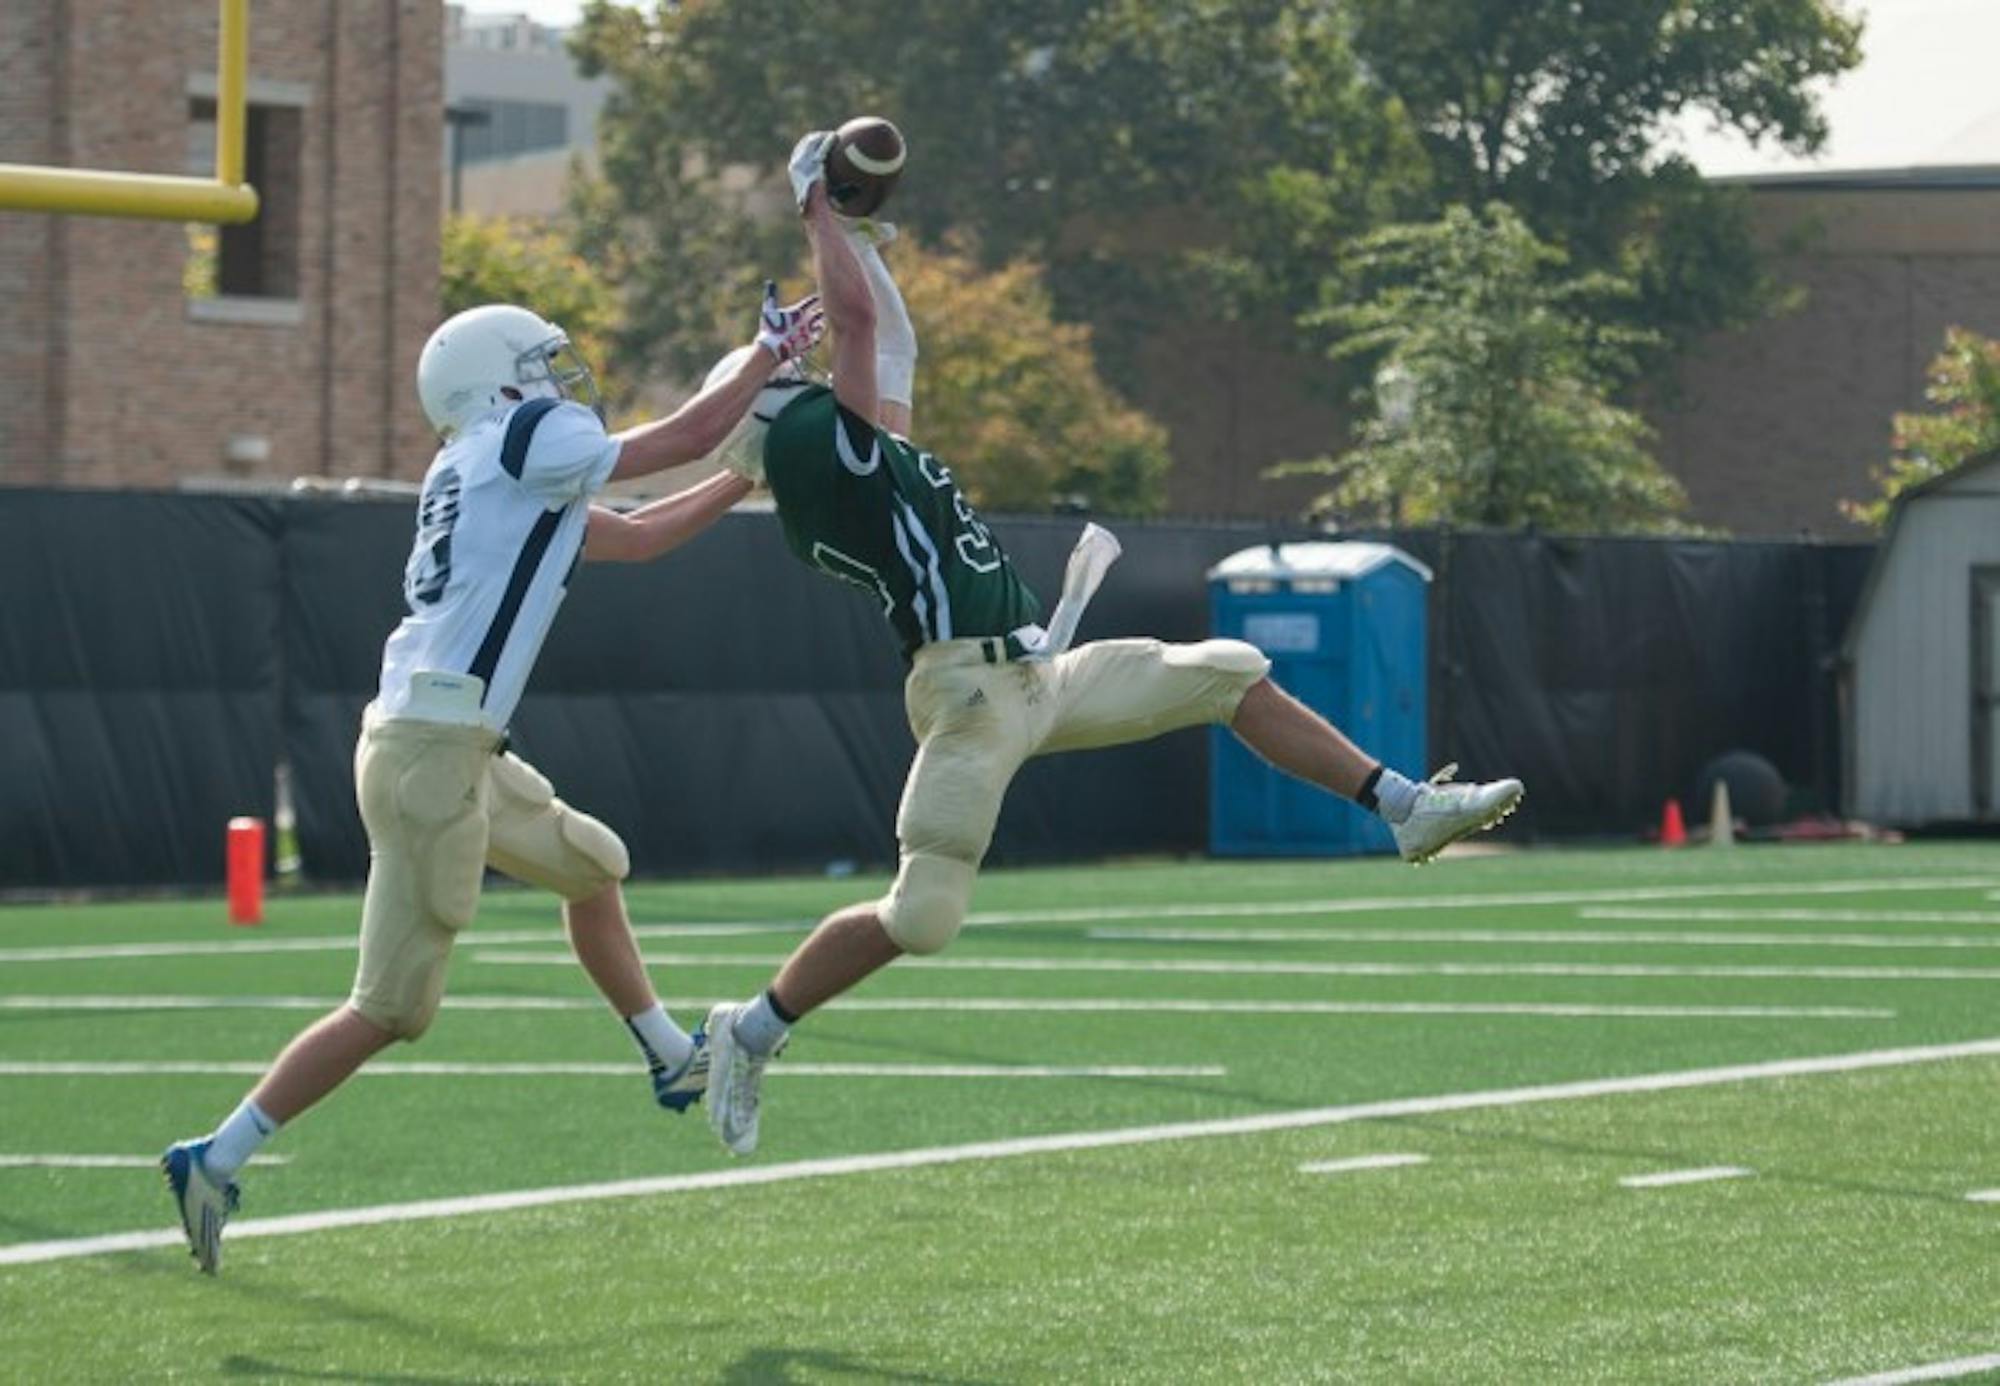 Fisher sophomore Alex Raymond makes an interception during St. Edward’s 14-0 win over Fisher on Sept. 25 at LaBar Practice Complex. The interception was one of four turnovers in the game.